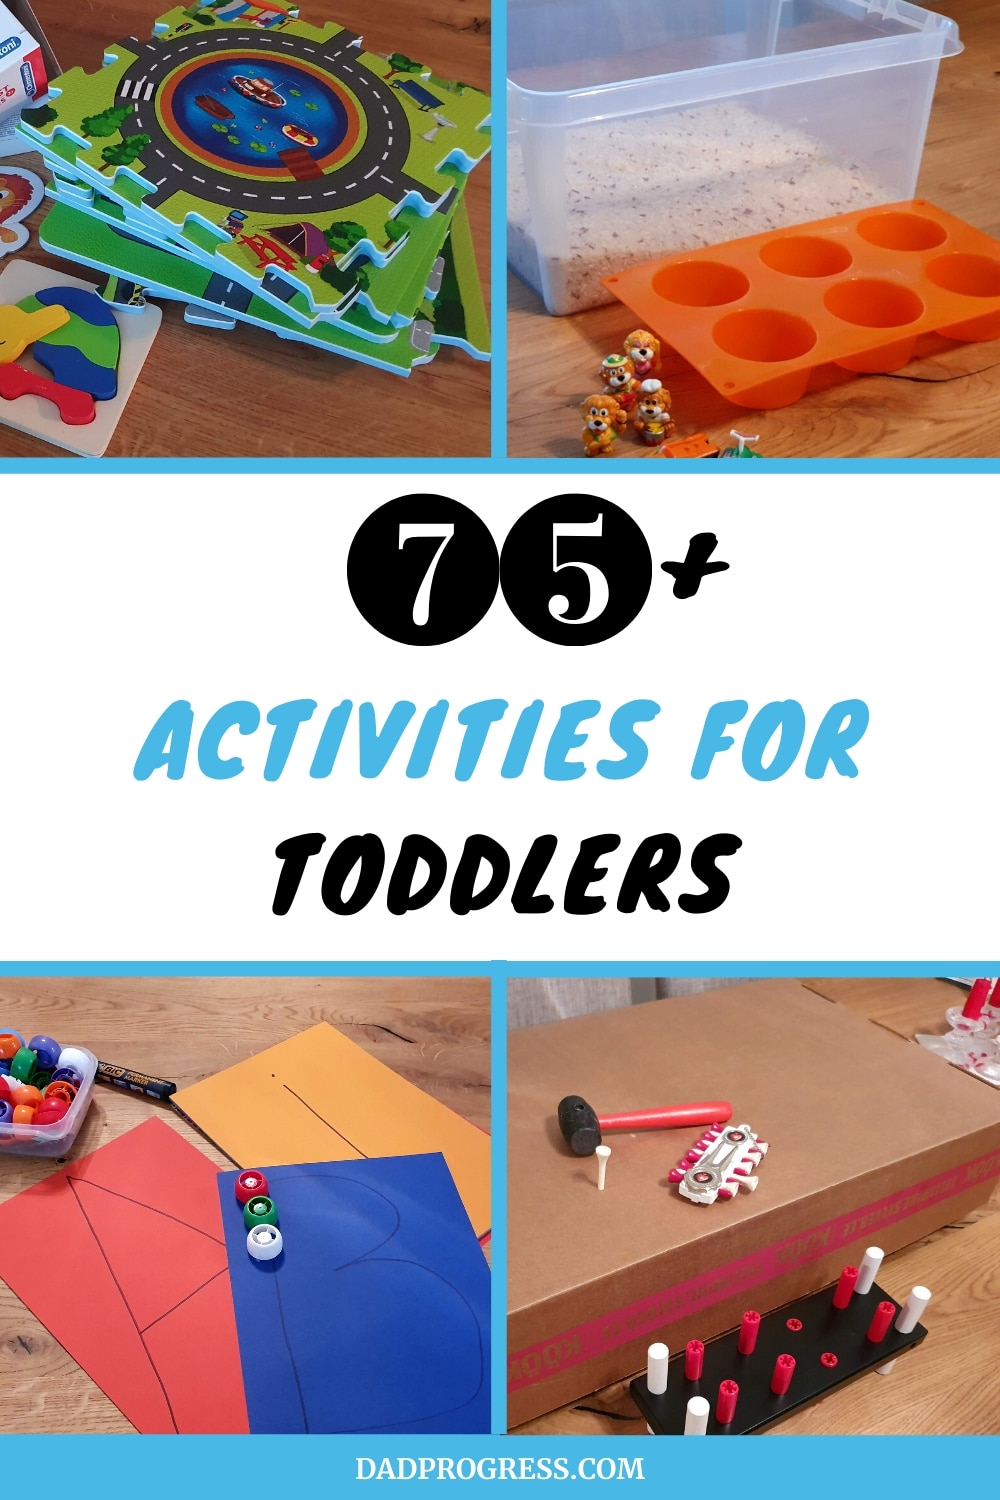 I put together an epic list of activities for toddlers at home (indoor or outdoor). You can find inspiration for under one or more advanced ideas for over 2 year olds. Click to see the list!